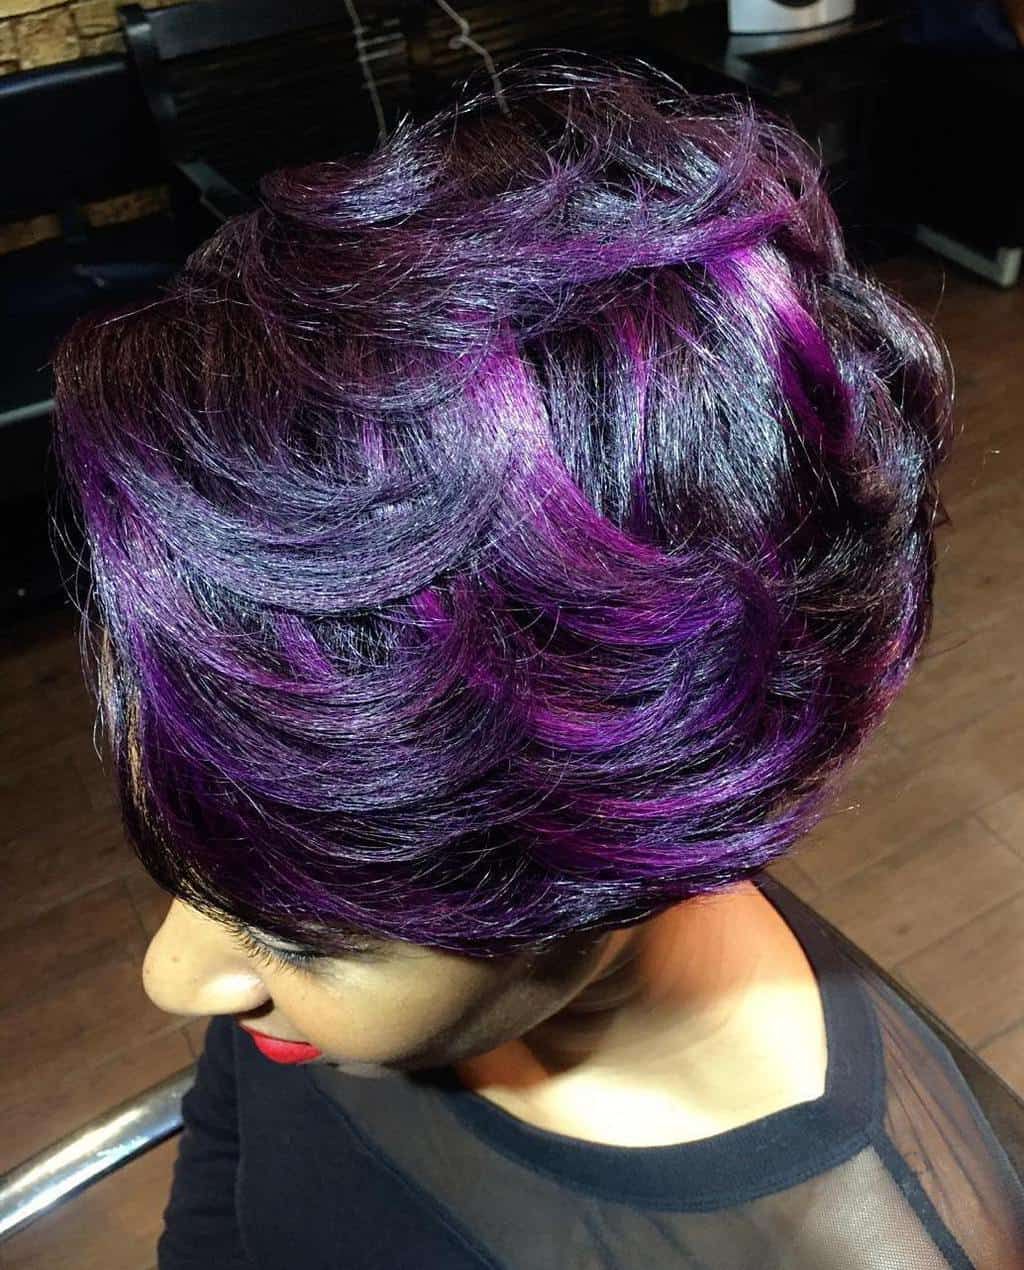 10 Brooding But Cool Black And Purple Hair Ideas For Current Purple And Black Medium Hairstyles (View 18 of 20)